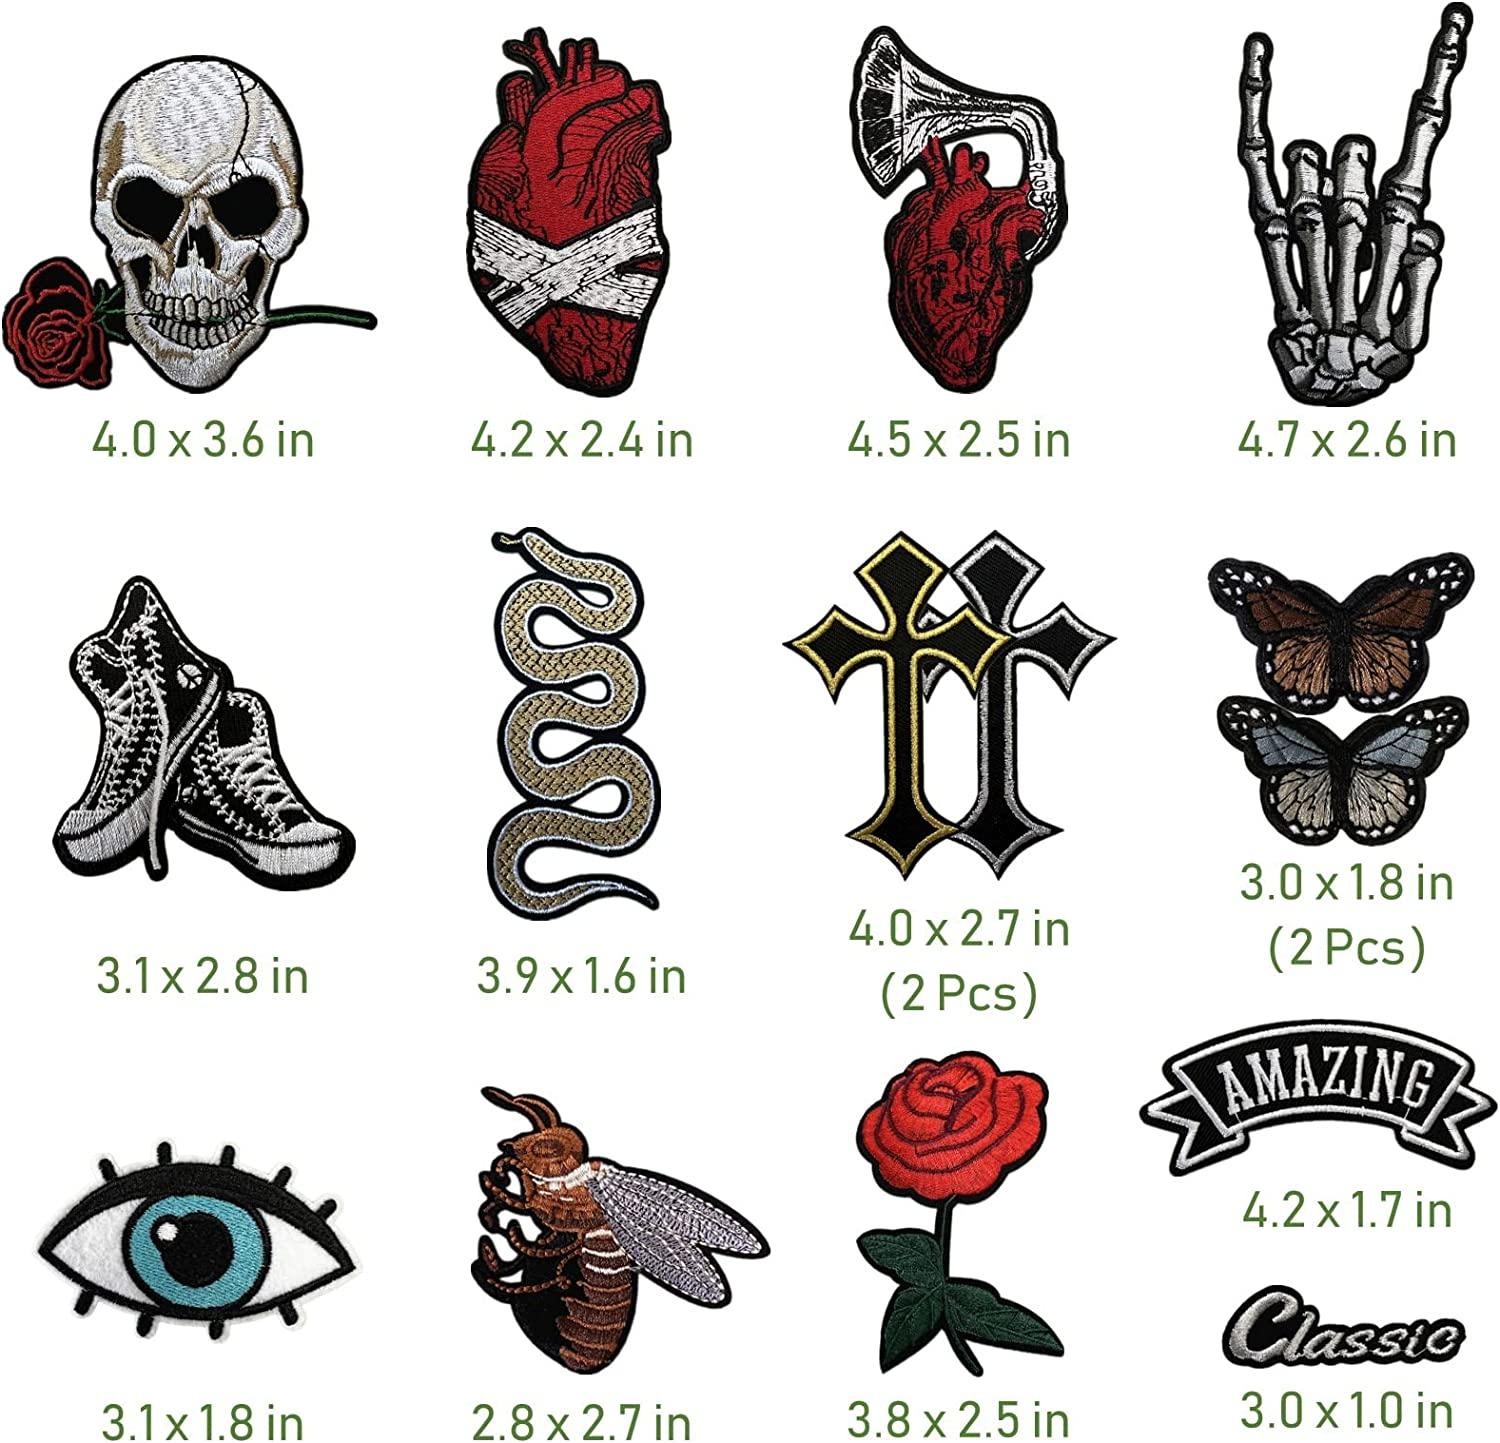 Dark Embroidered Applique Iron On Patches for Backpacks, Rock Band Patches  for Jackets, Cool Sew Patch for Clothing, Jeans, Hats, DIY Accessories  (Dark 15 Pcs)